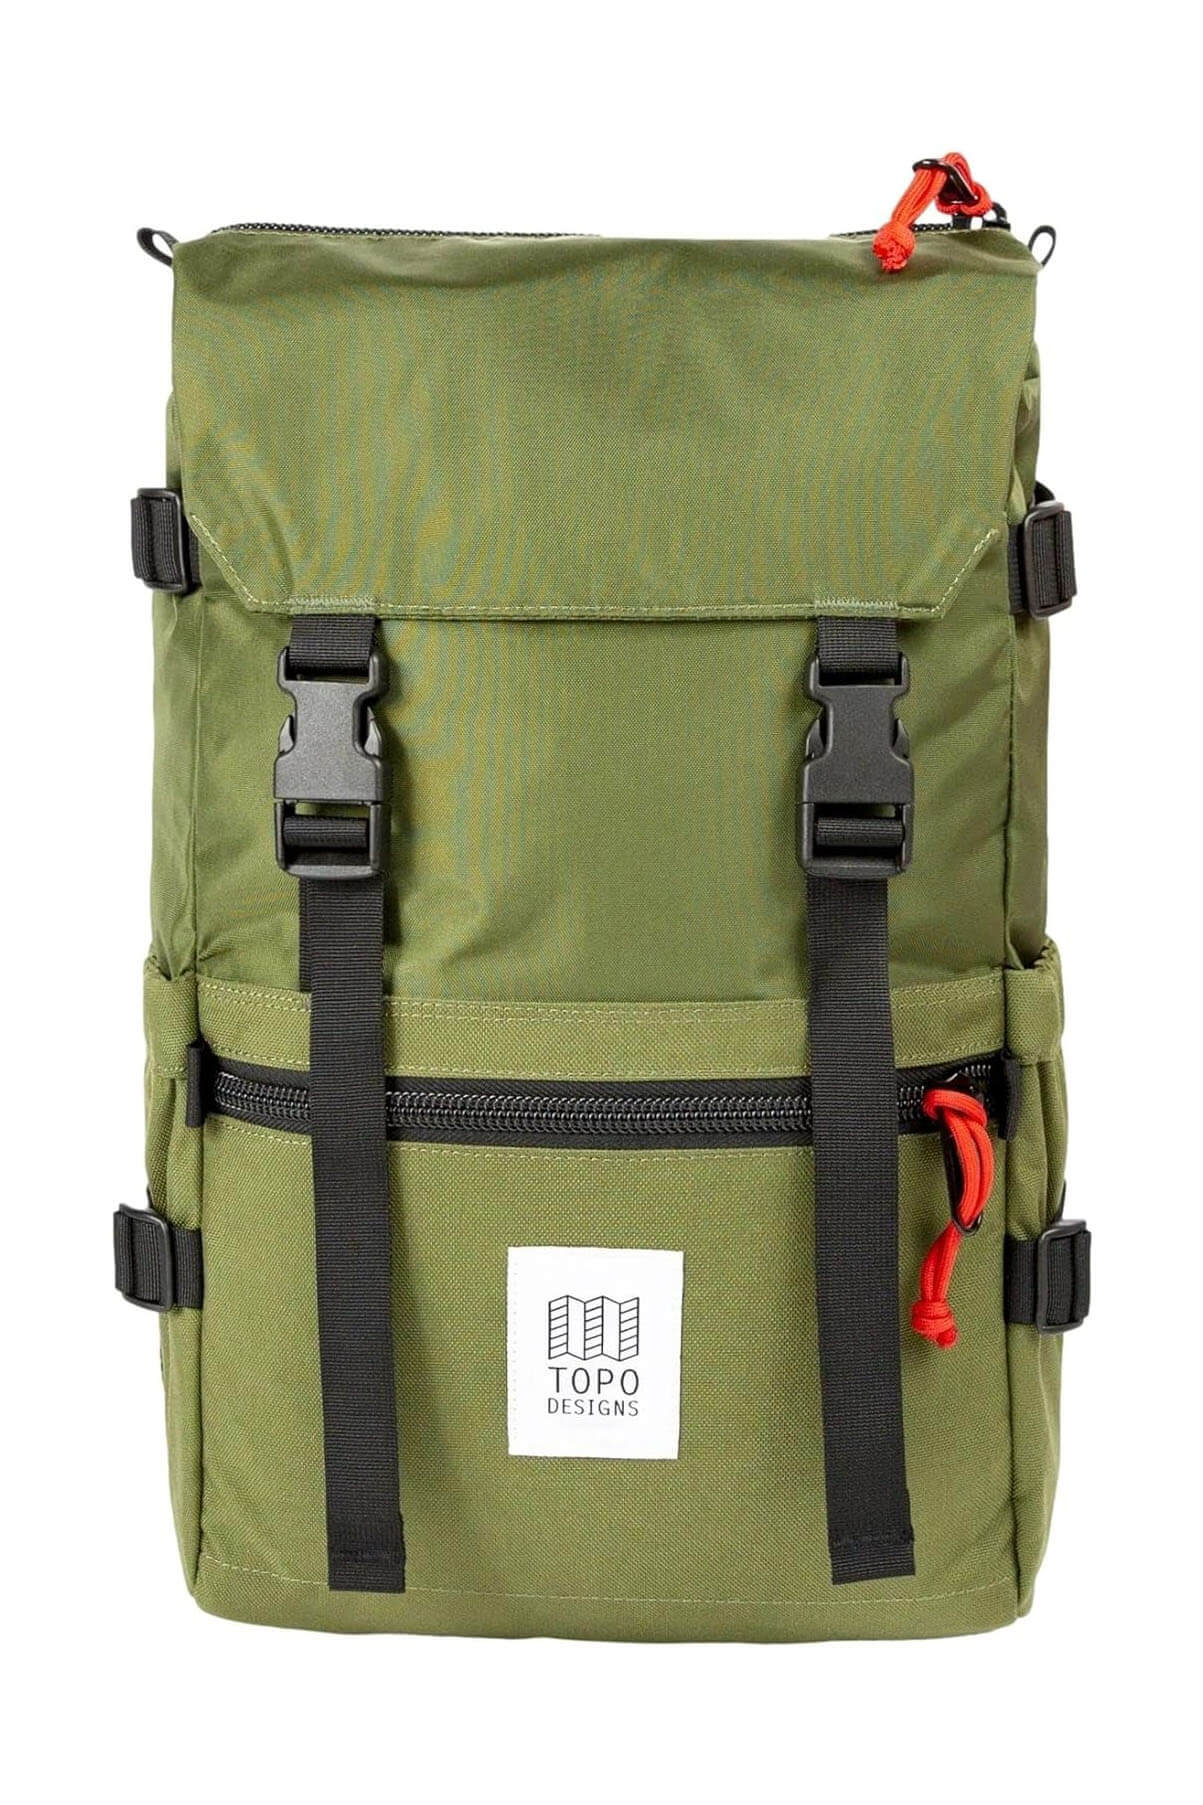 Topo Designs rover pack classic in olive